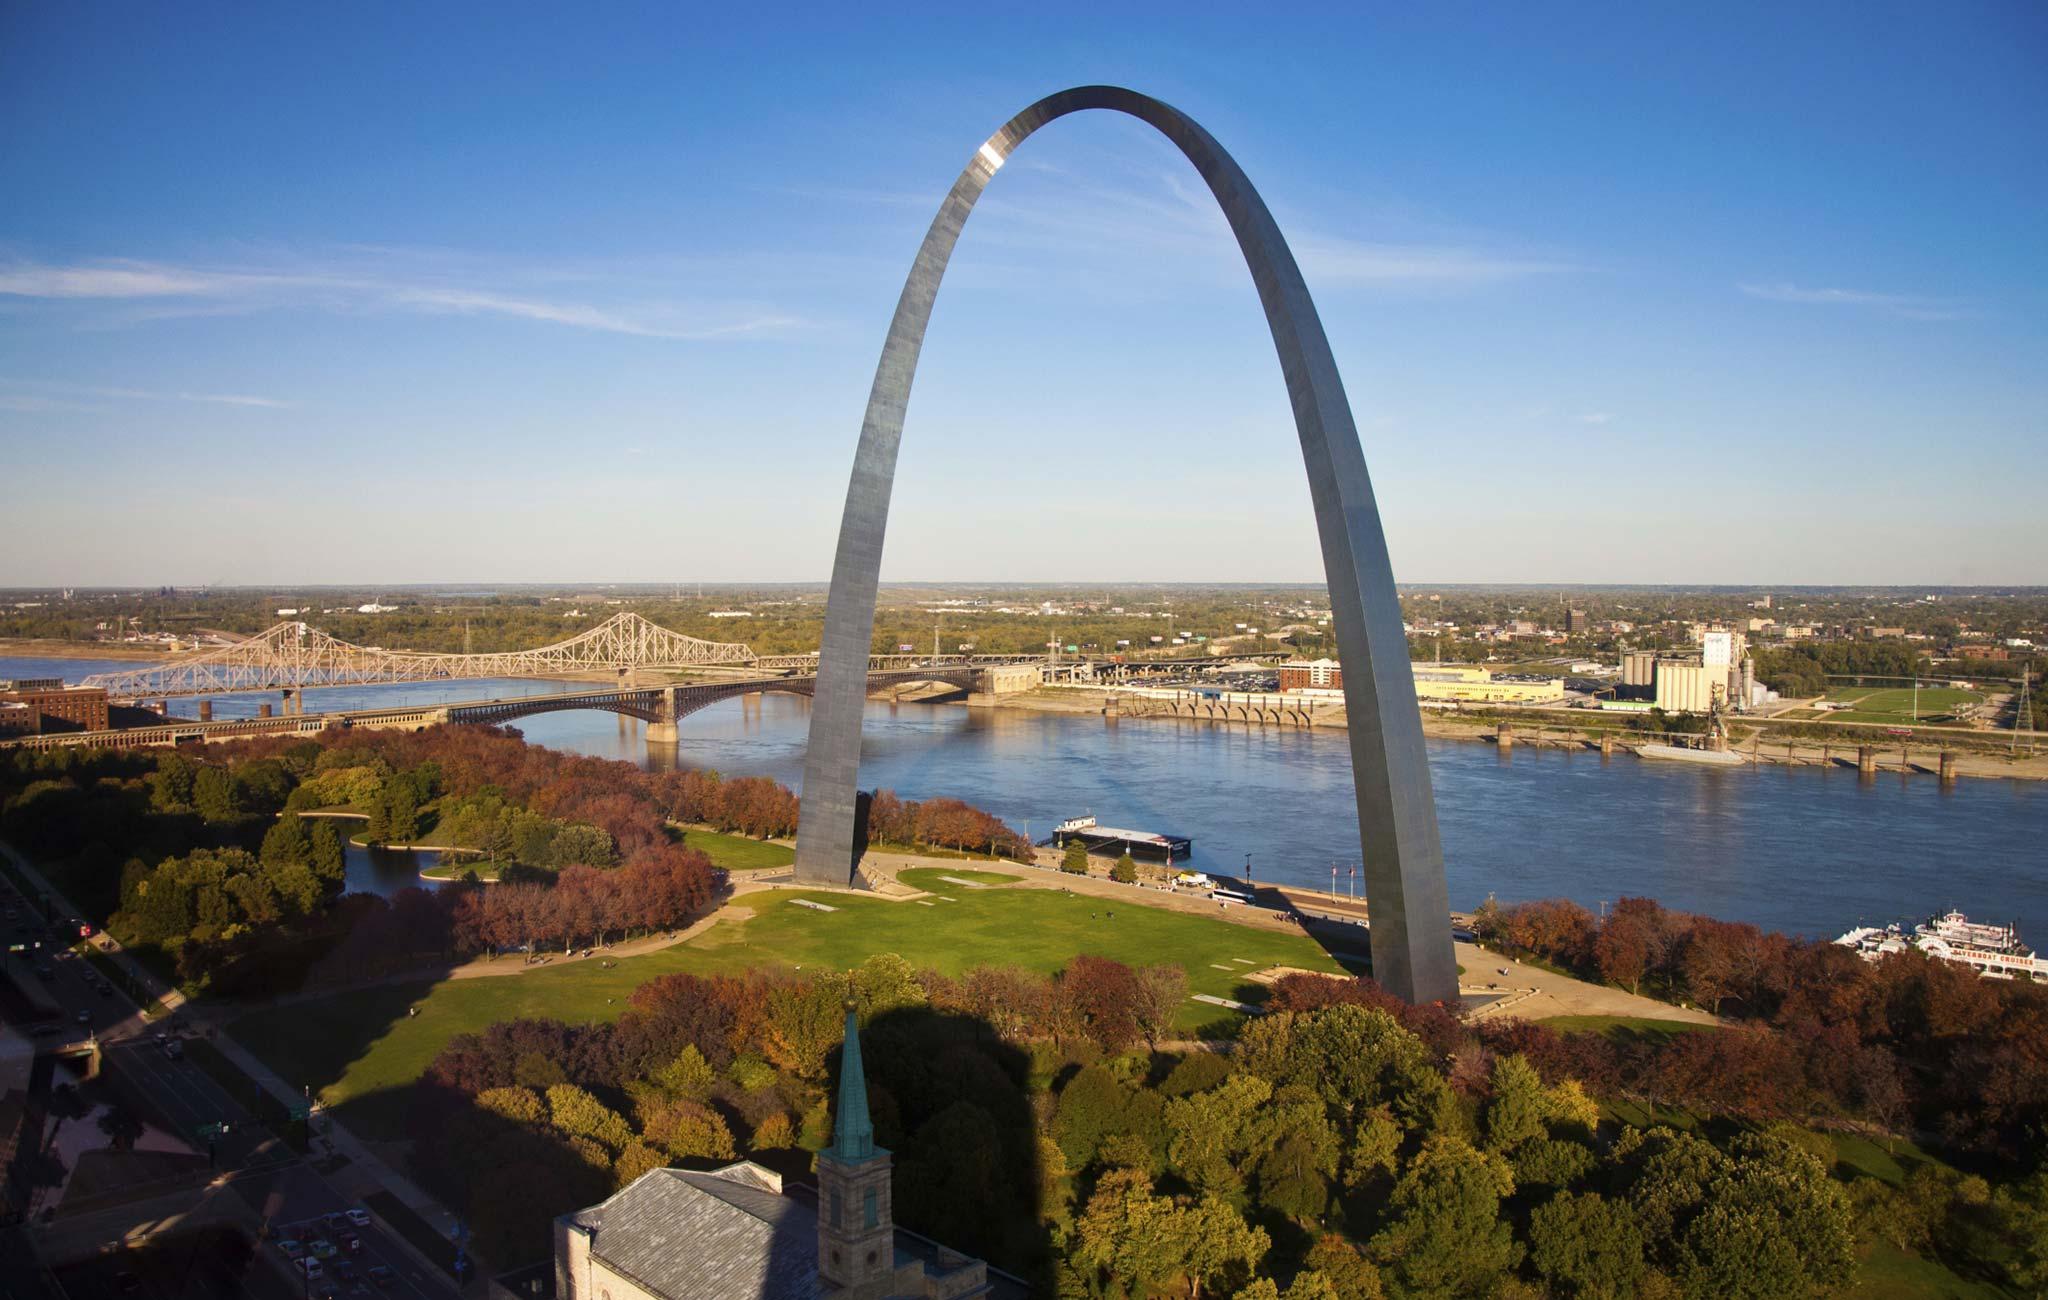 St. Louis Looking to Attract More Visitors Through Arch Renovations - Lindenlink